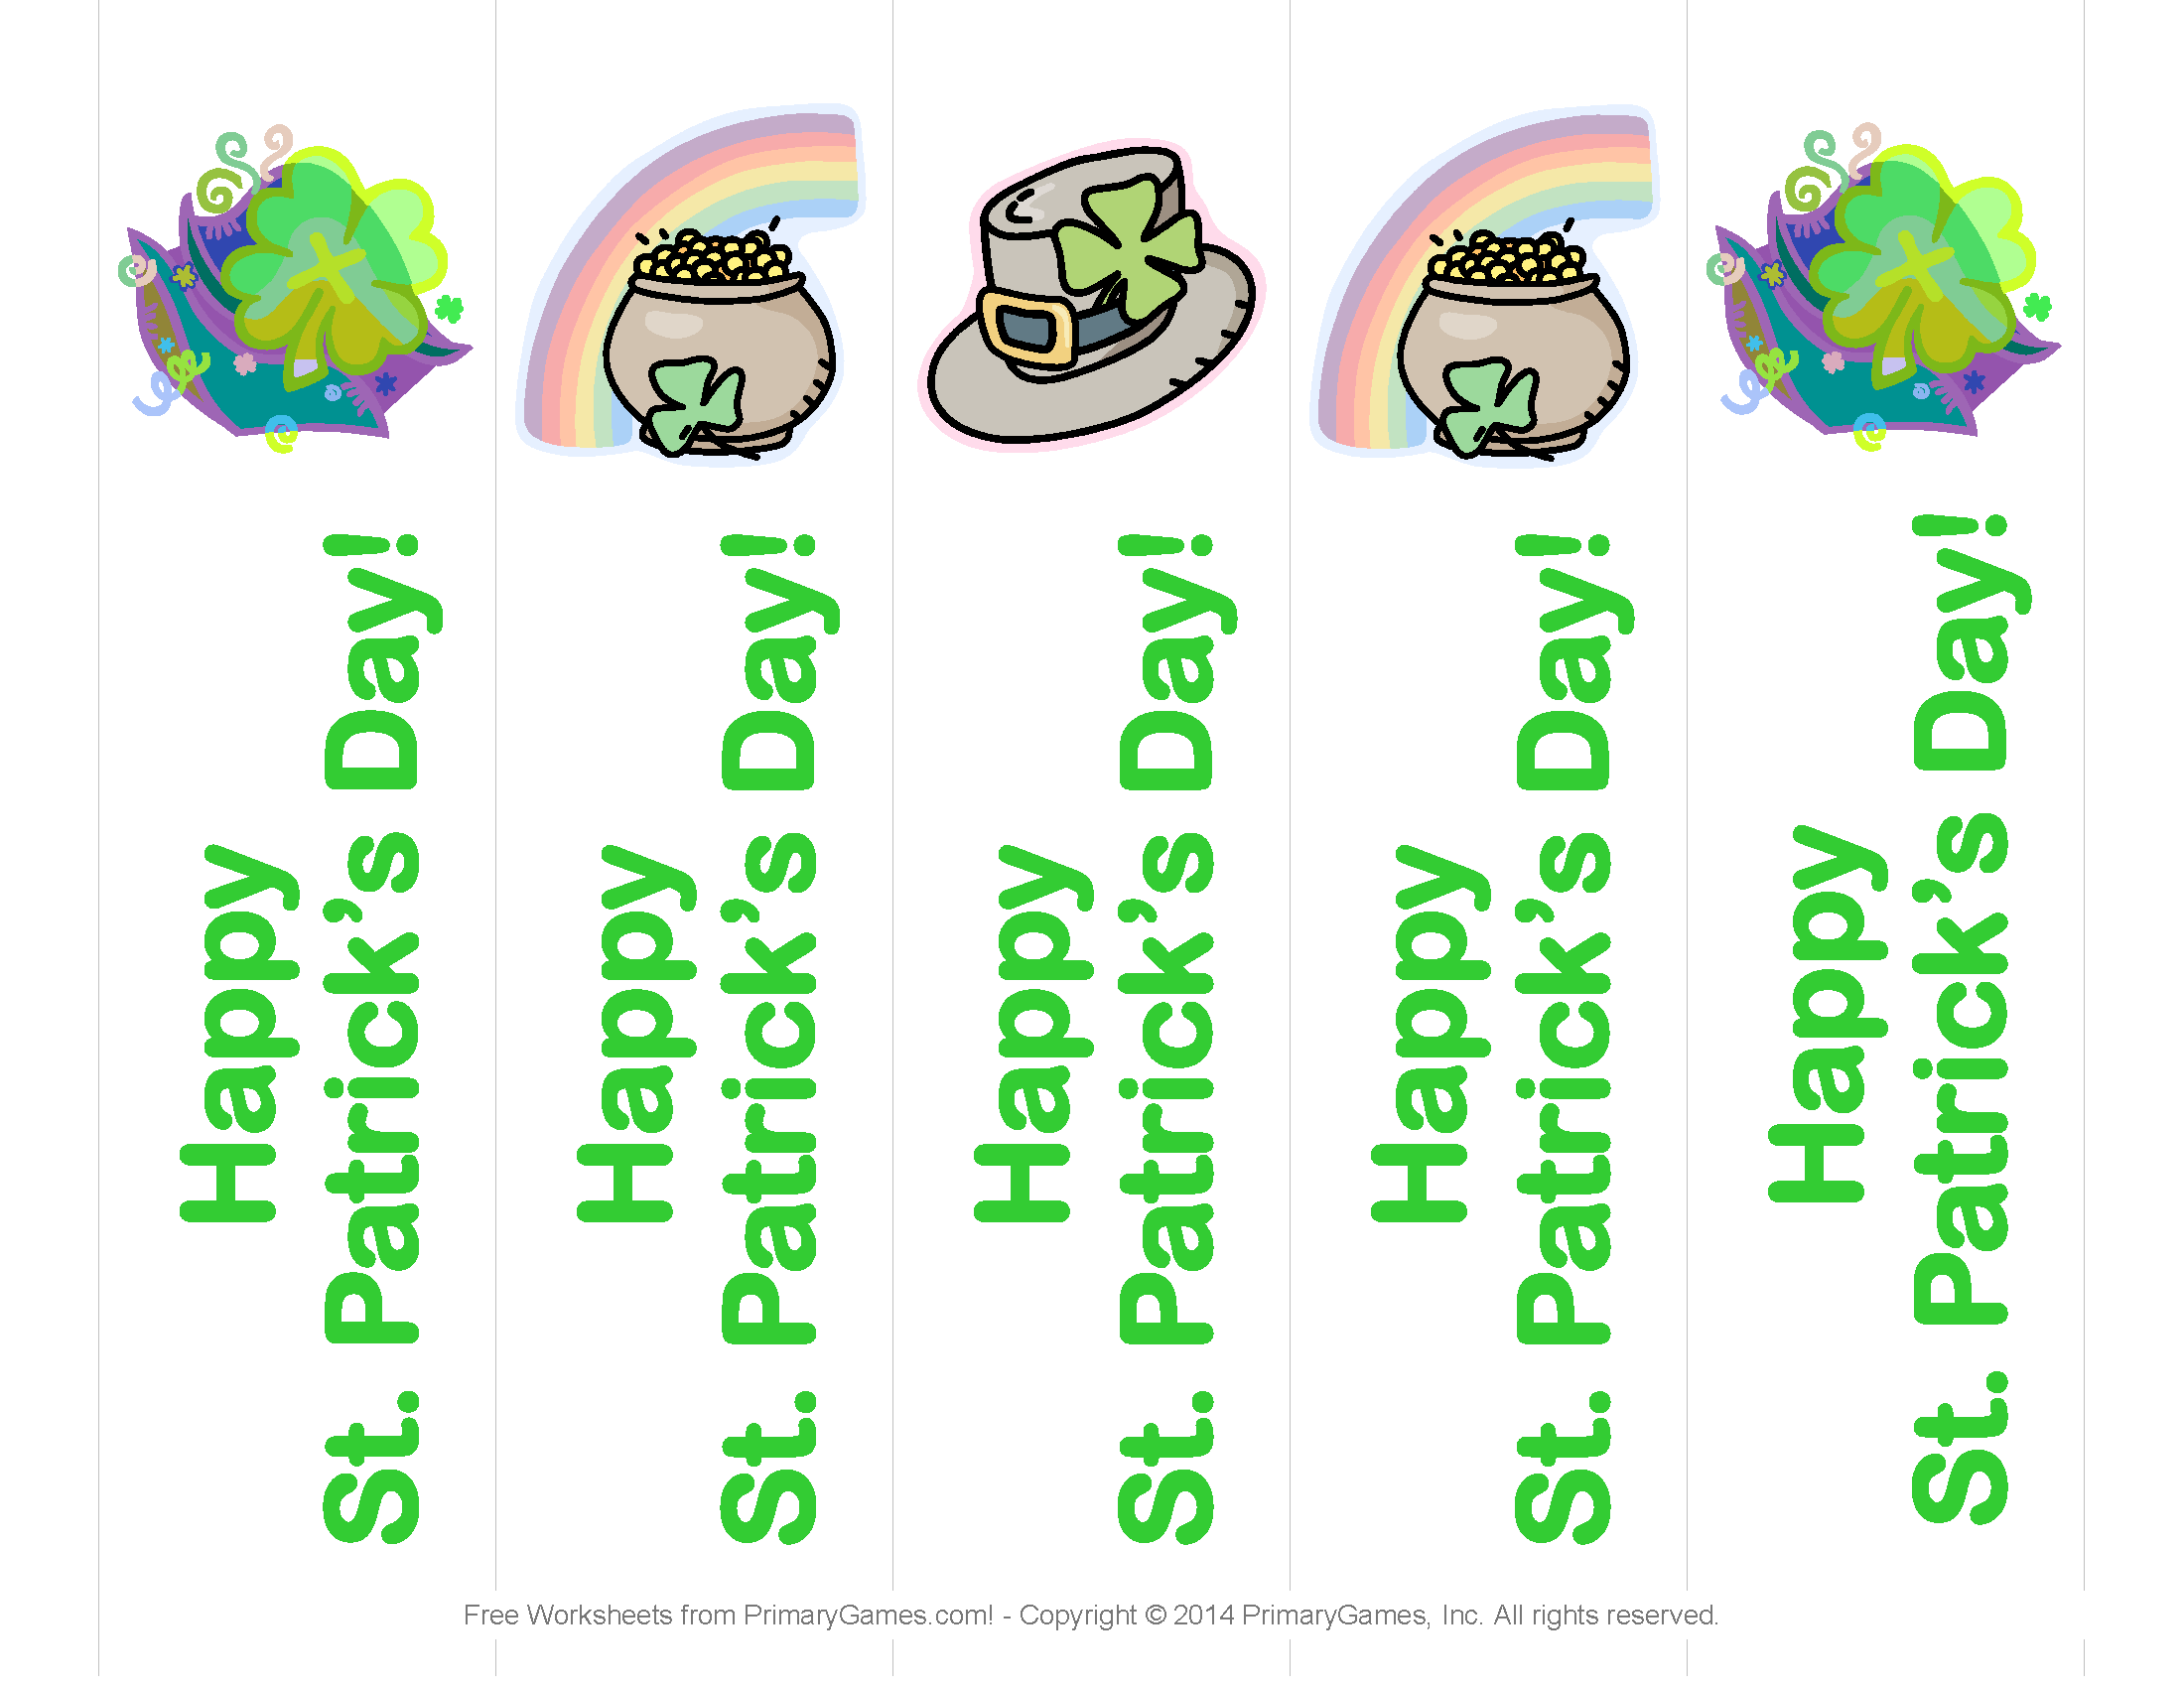 St. Patrick's Day Worksheets: St. Patrick's Day Bookmarks - PrimaryGames - Play Free ...2200 x 1700